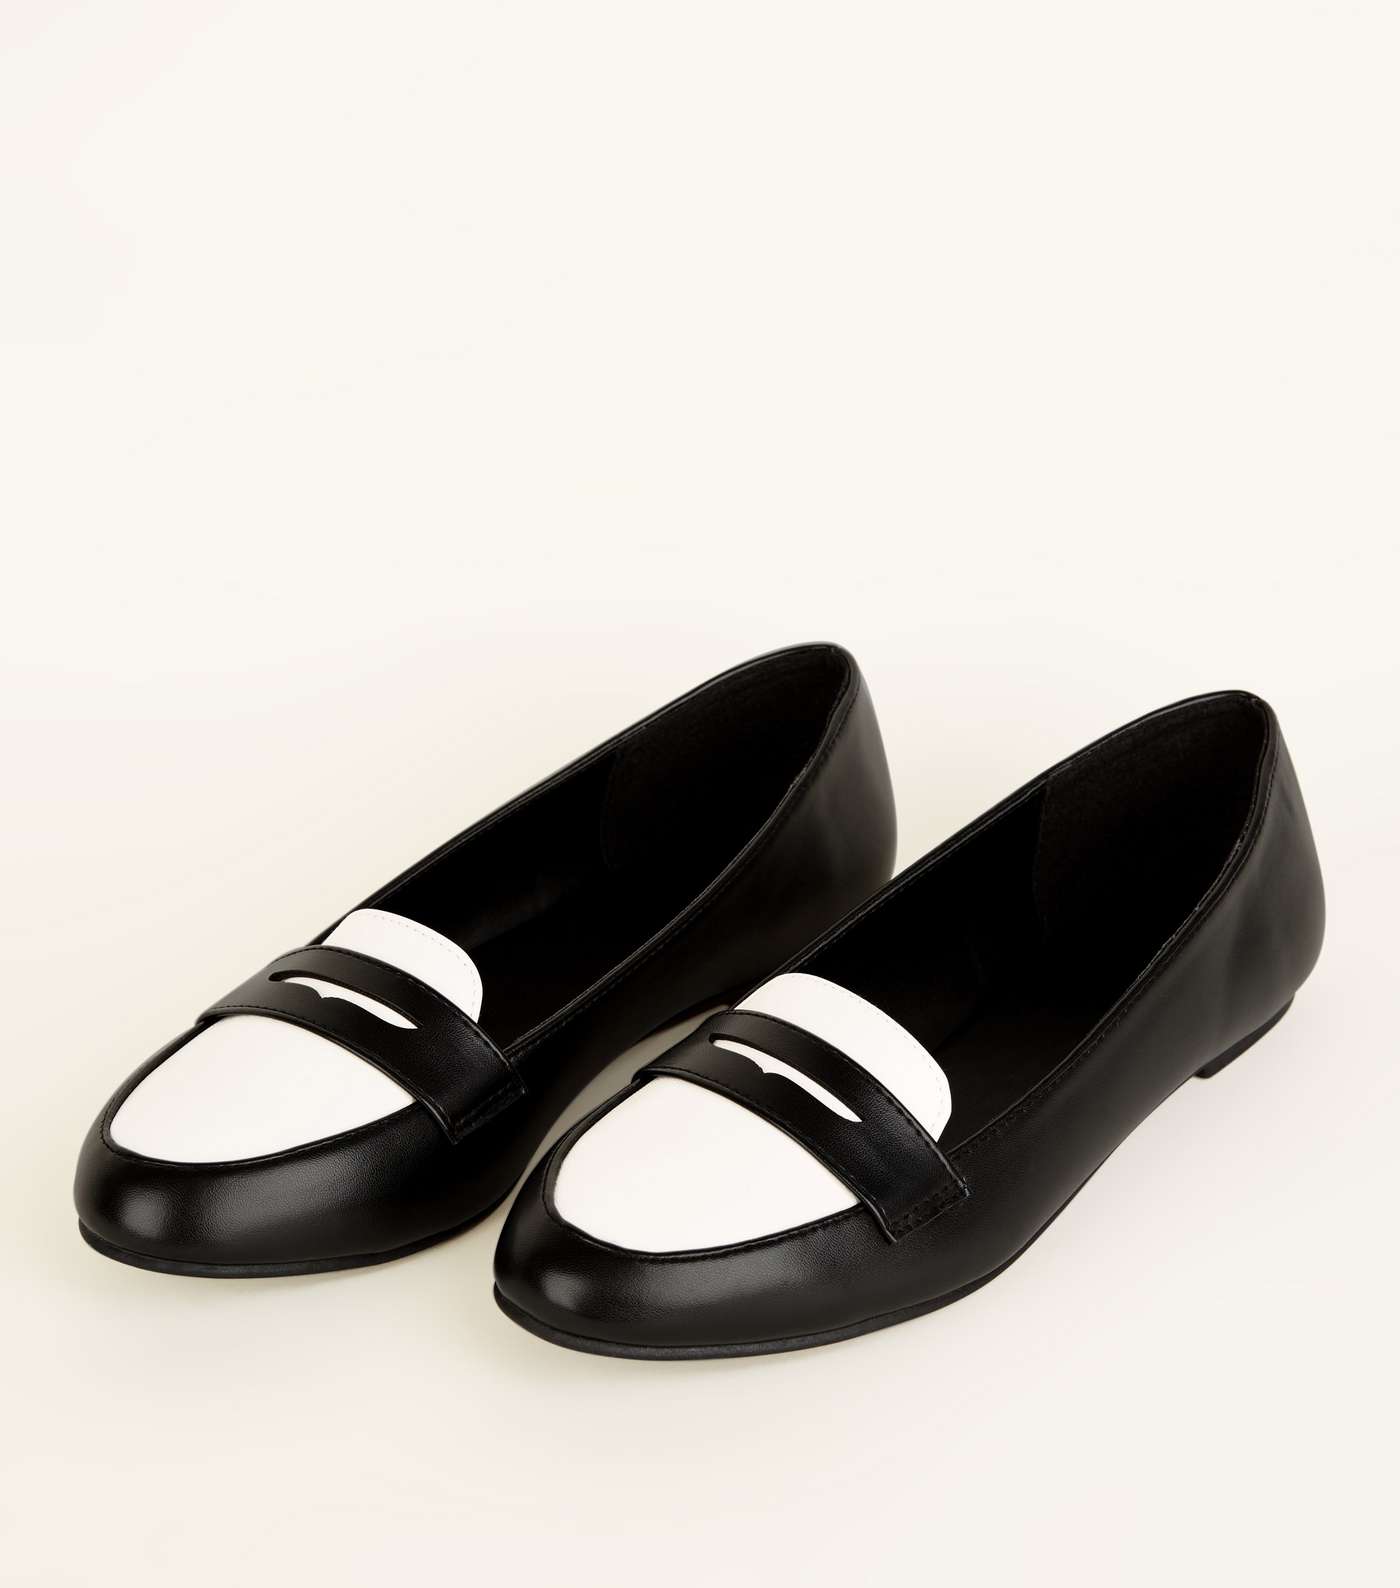 Monochrome Leather-Look Penny Loafers Image 3